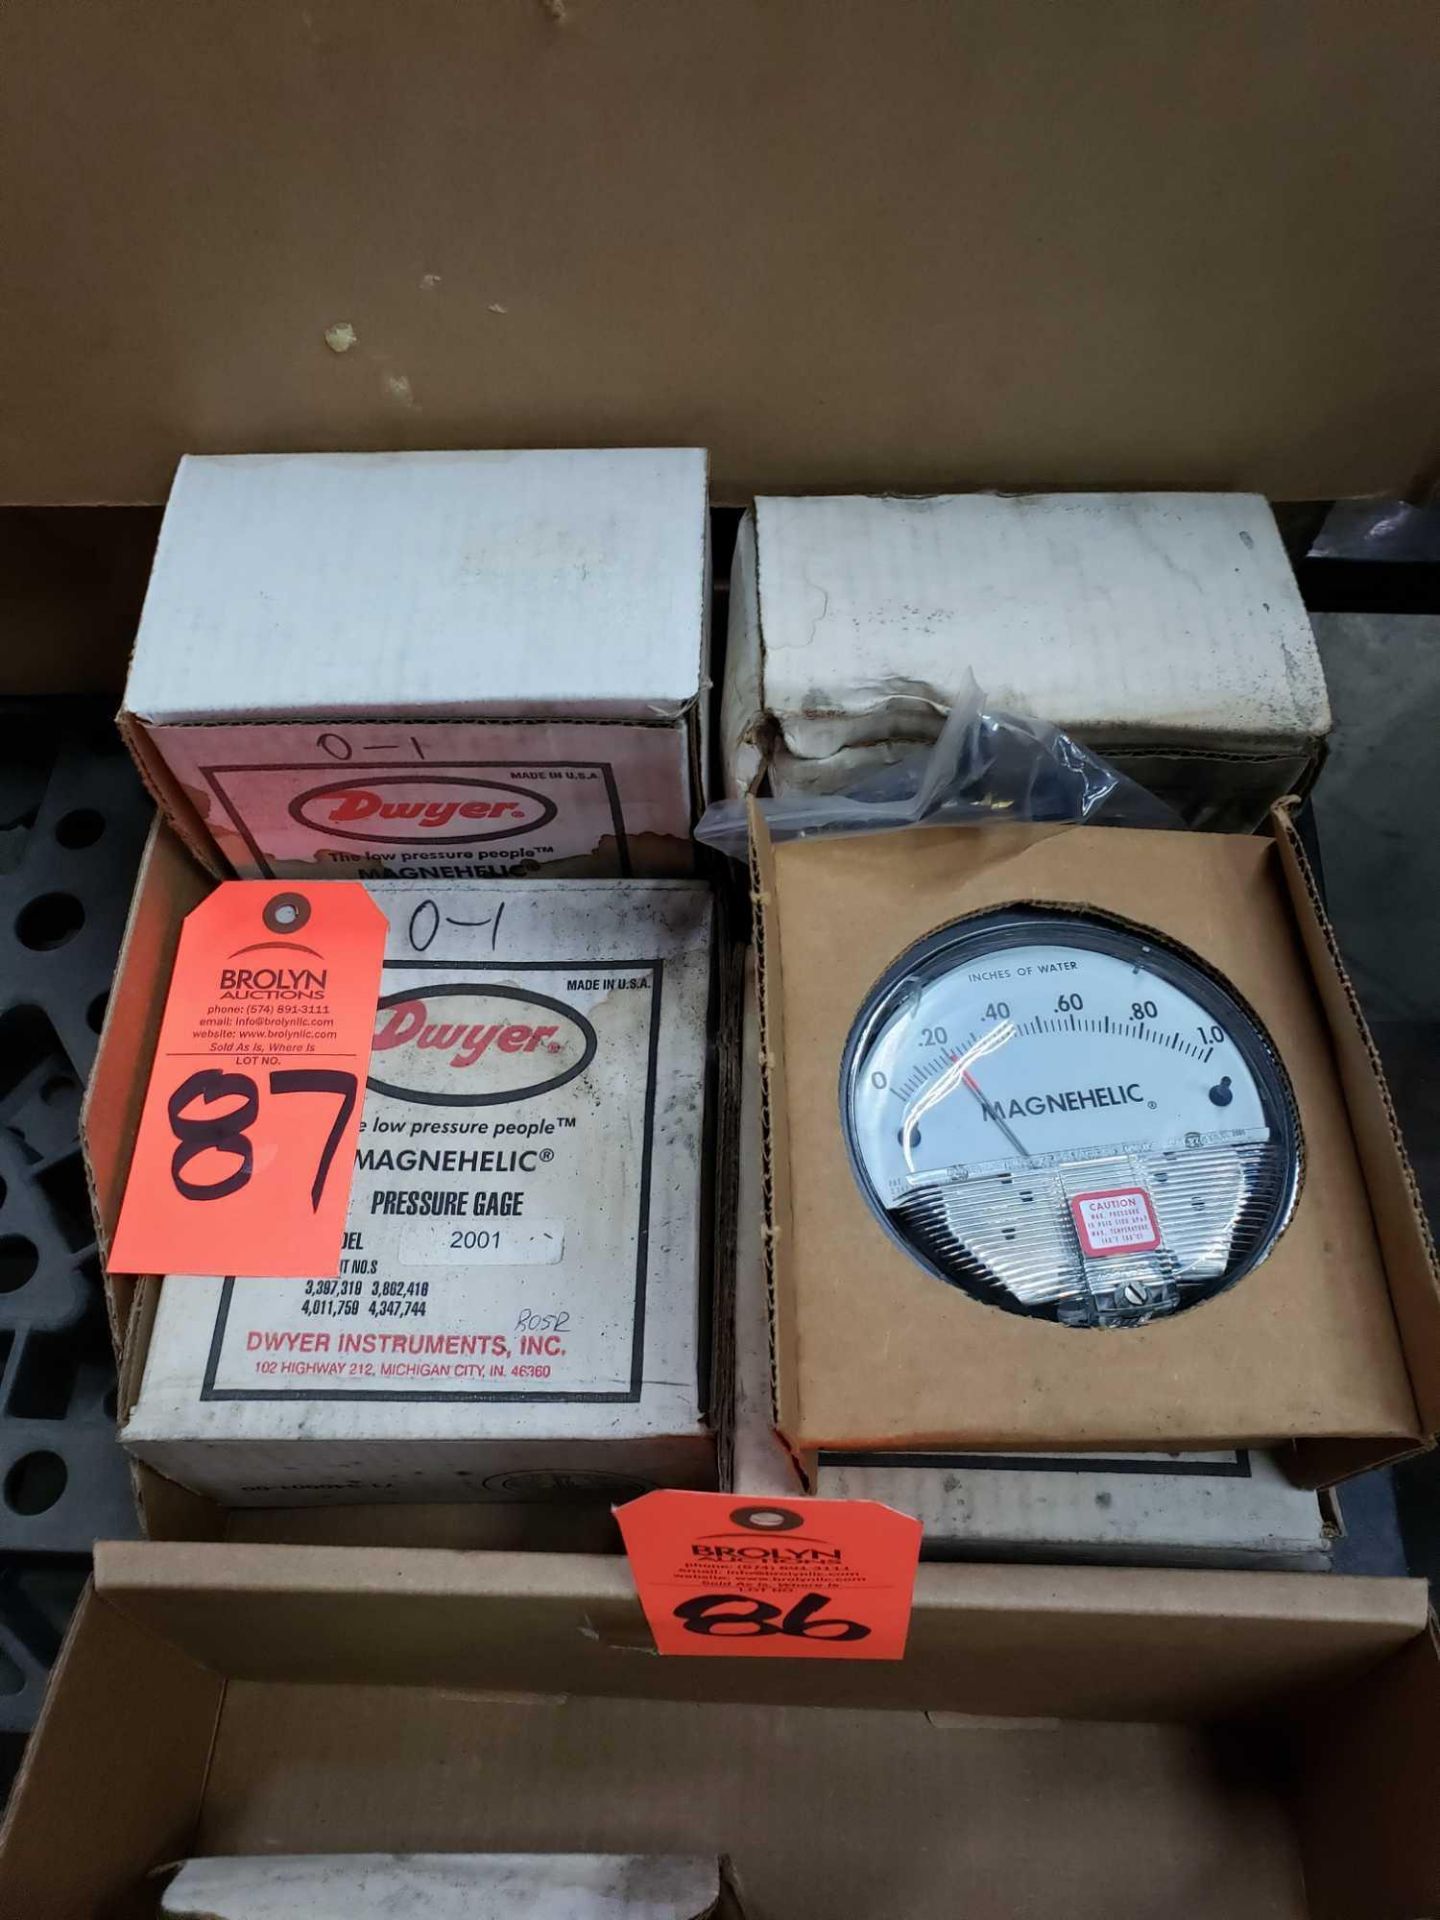 Qty 4 - Dwyer Magnehelic pressure gauges. New. Boxes show wear.